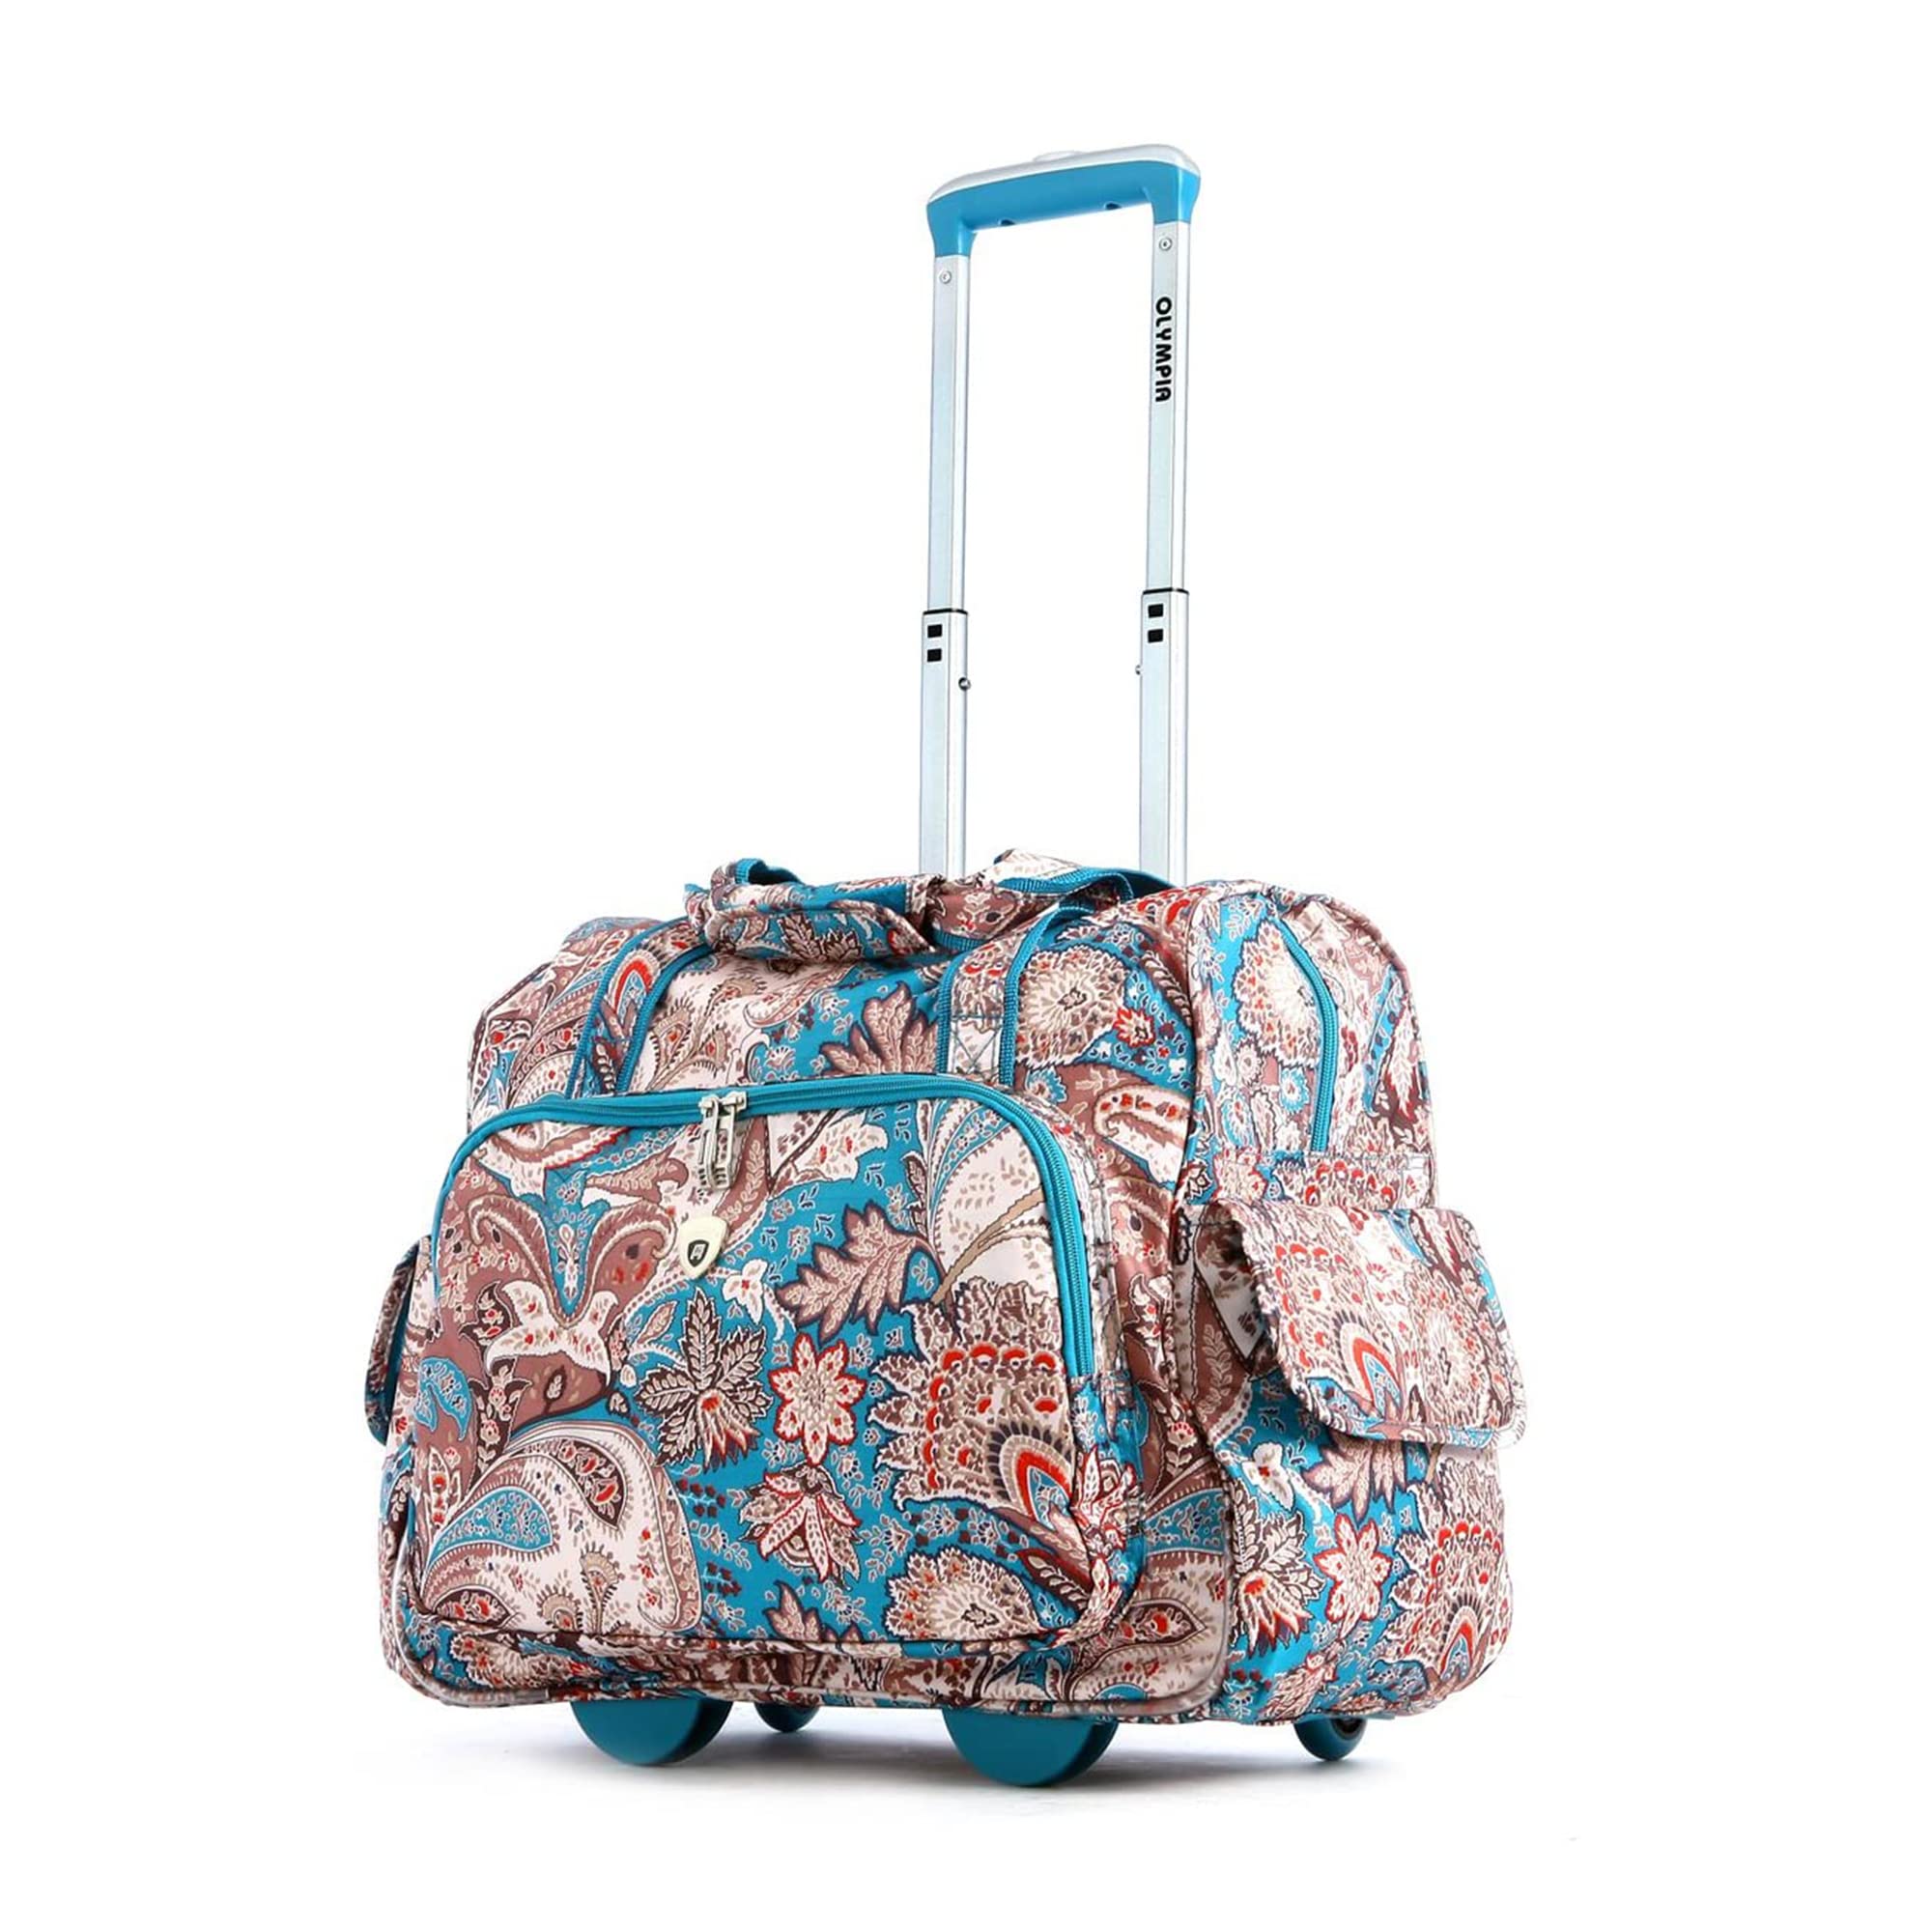 Olympia Deluxe Fashion Rolling Overnighter, Paisley, One Size